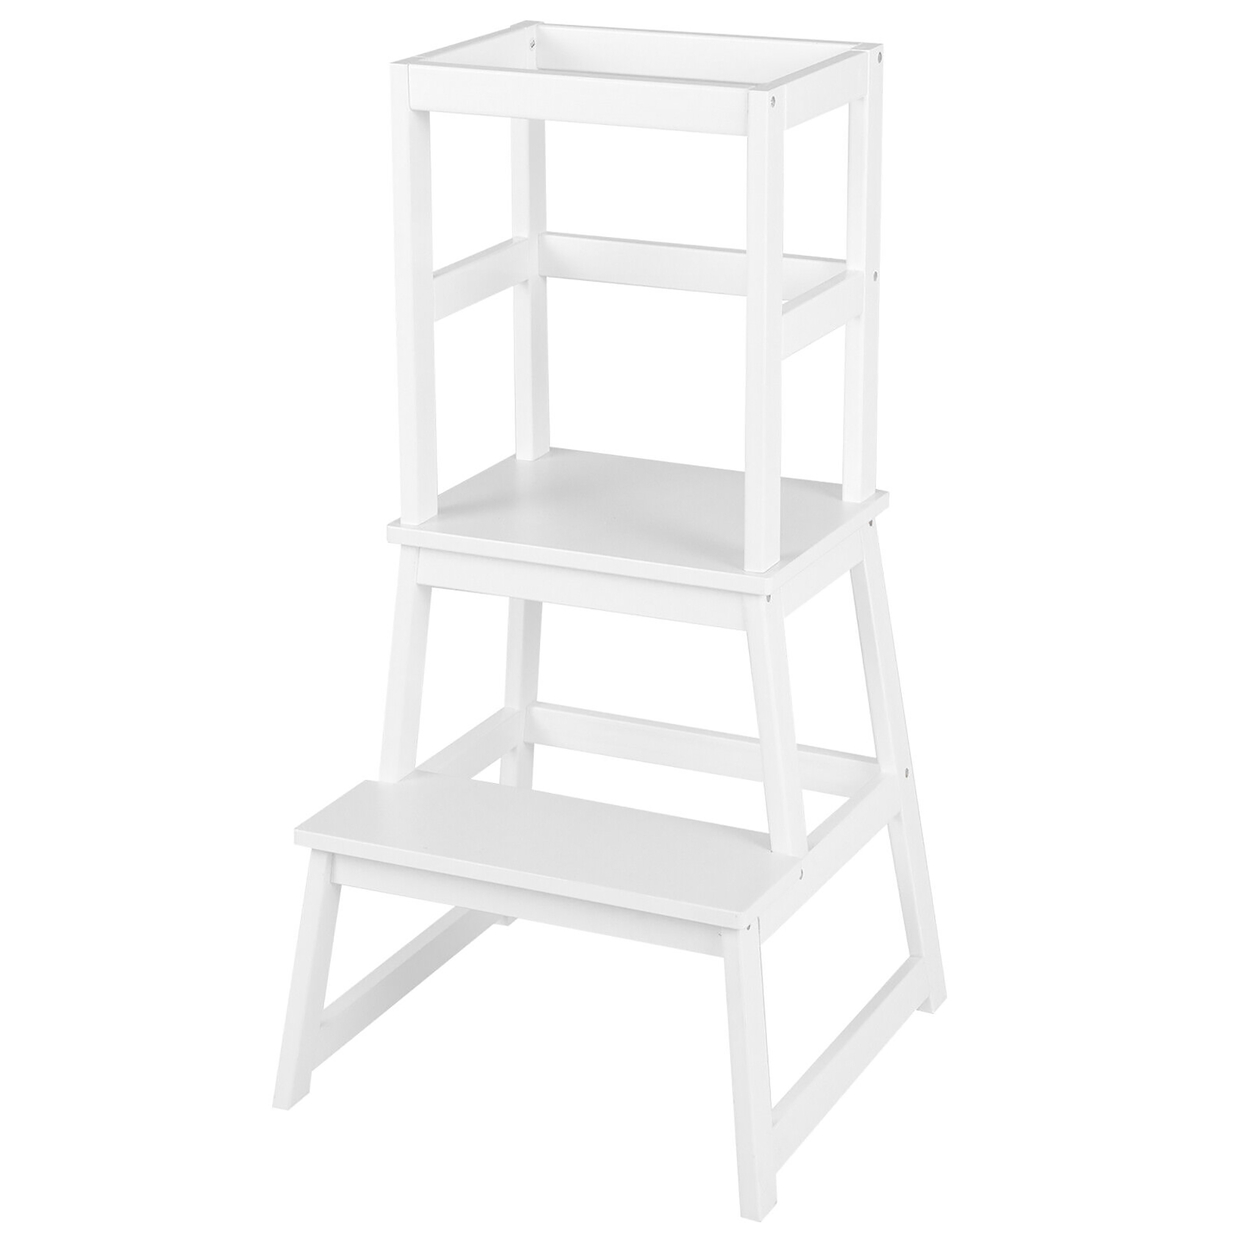 Kids Kitchen Step Stool Kids Standing Tower With Safety Rails - White